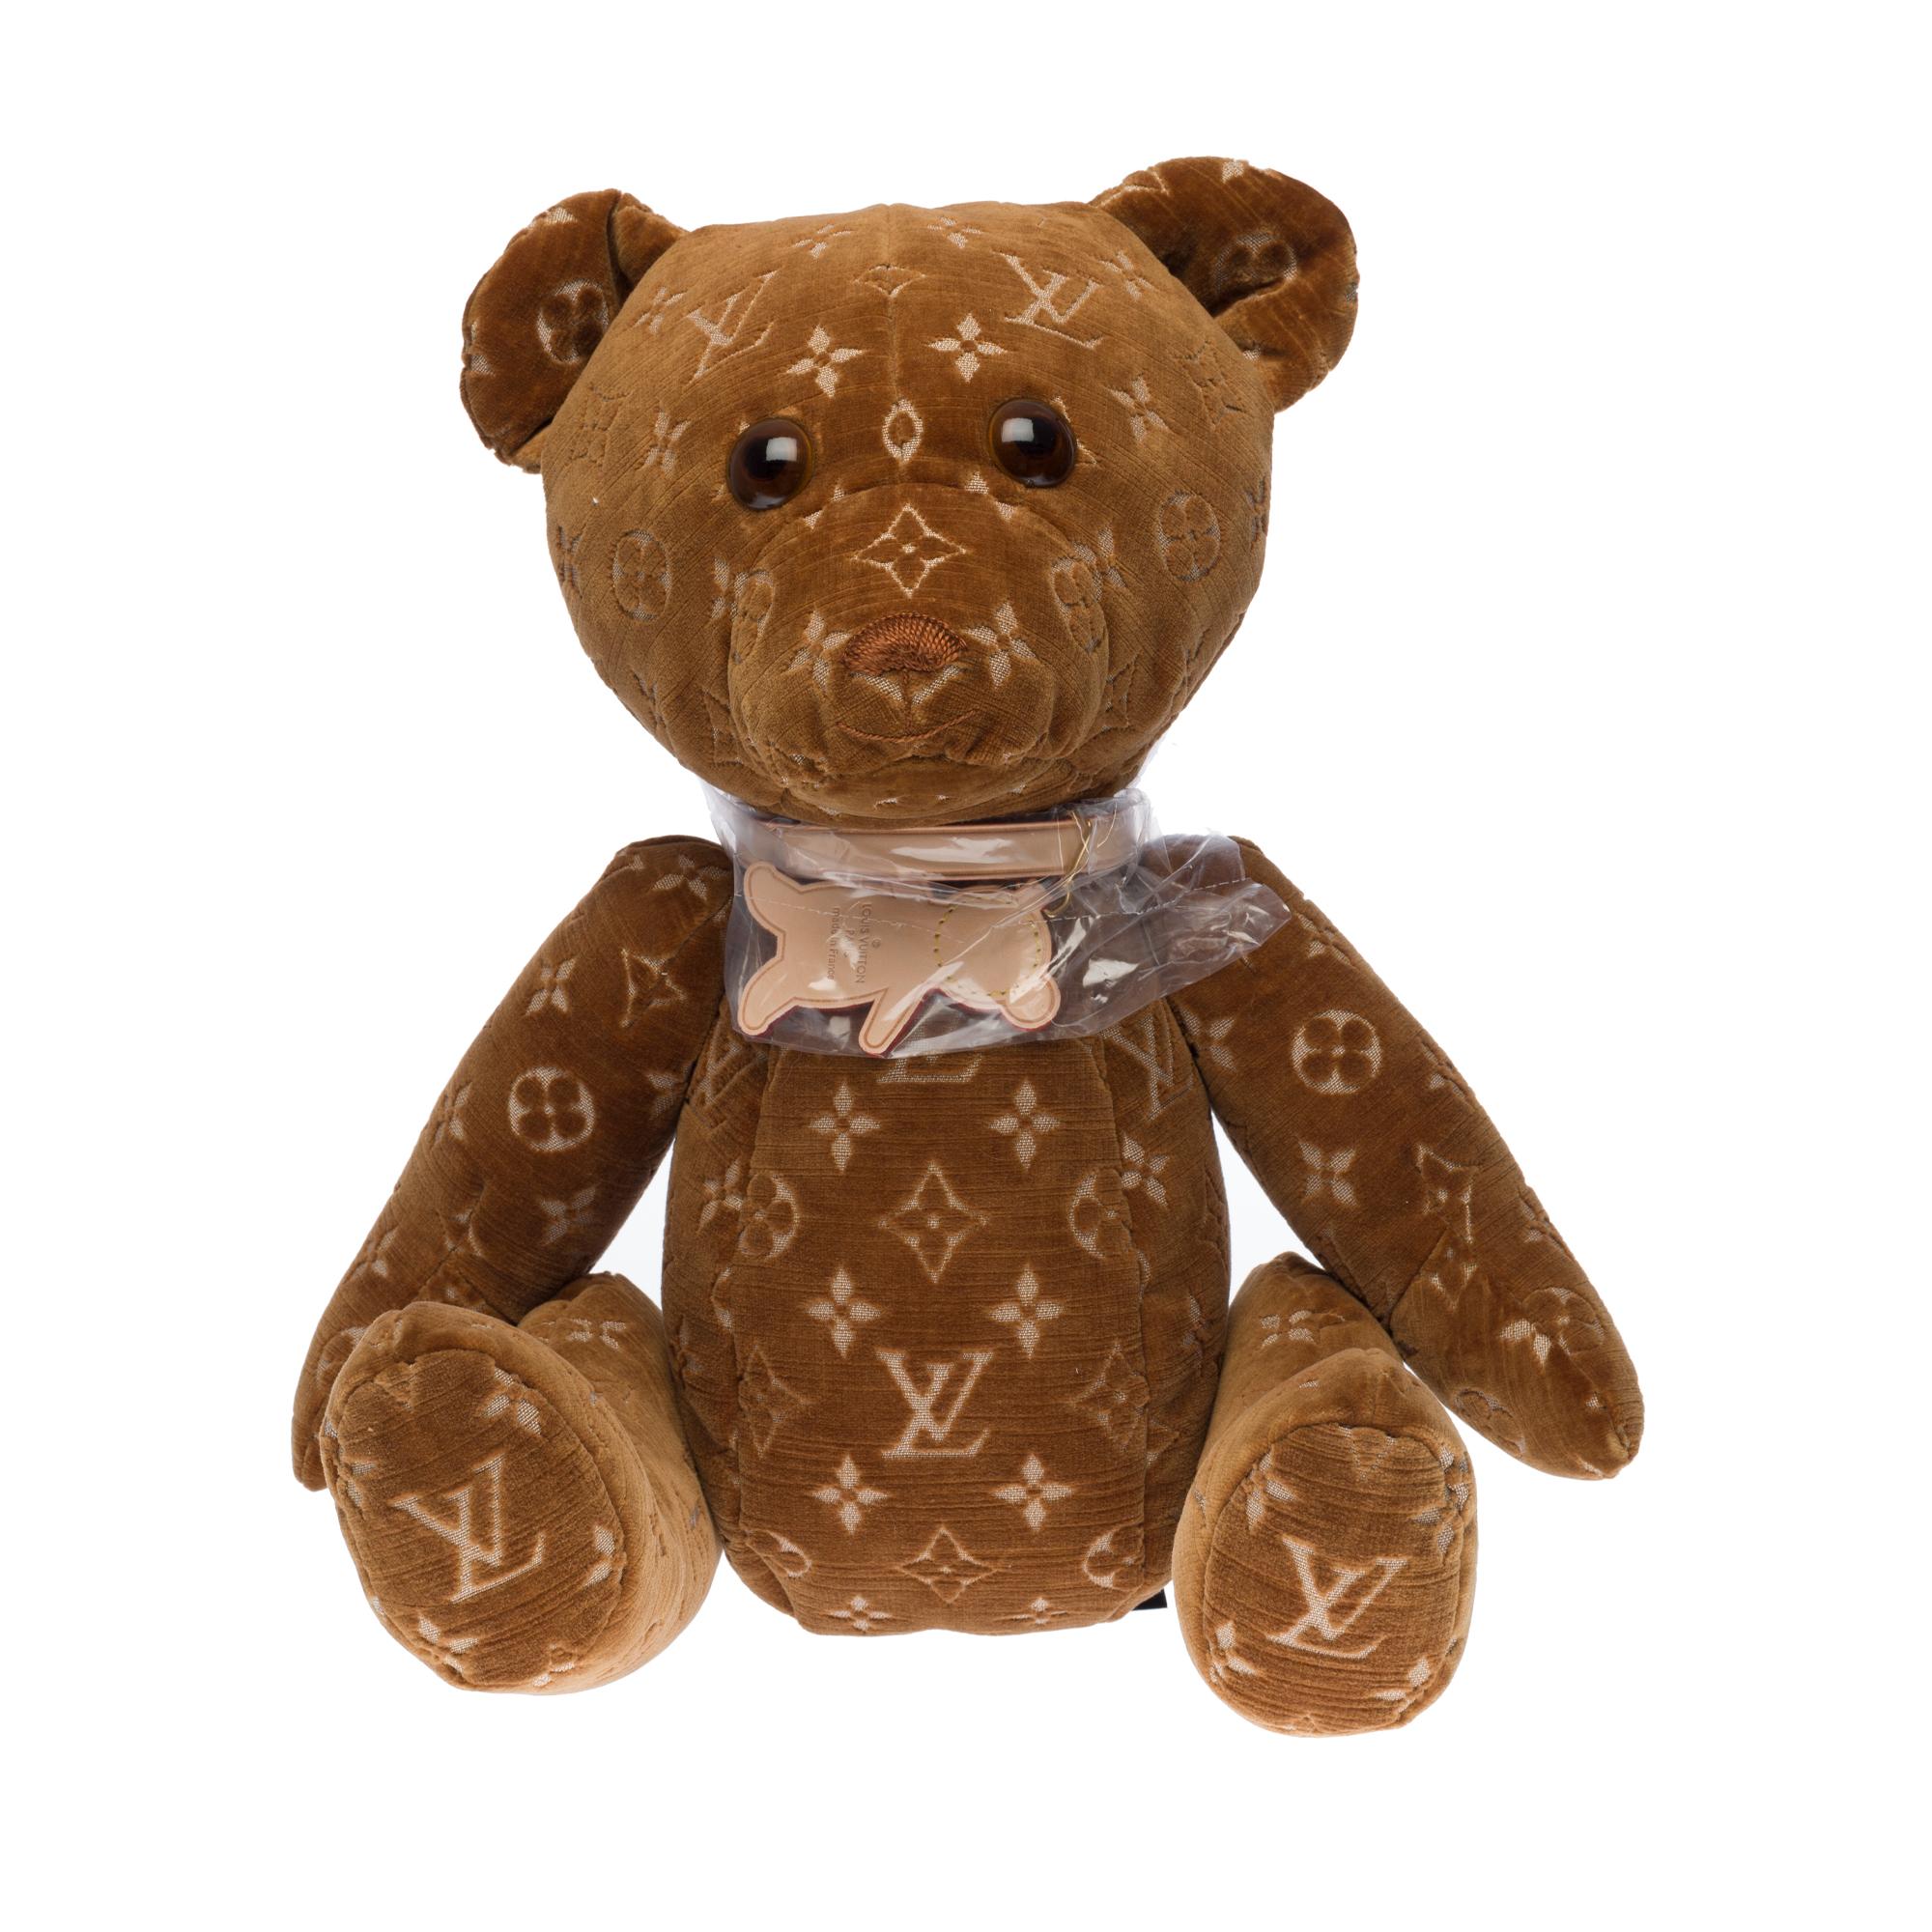 First seen on the Runway in 2004, the Teddy Bear DouDou is the only Teddy Bear created by Louis Vuitton in its 150 year history! With only 500 released worldwide this Teddy Bear is an adorable and rare item to own. It's crafted from soft beige and